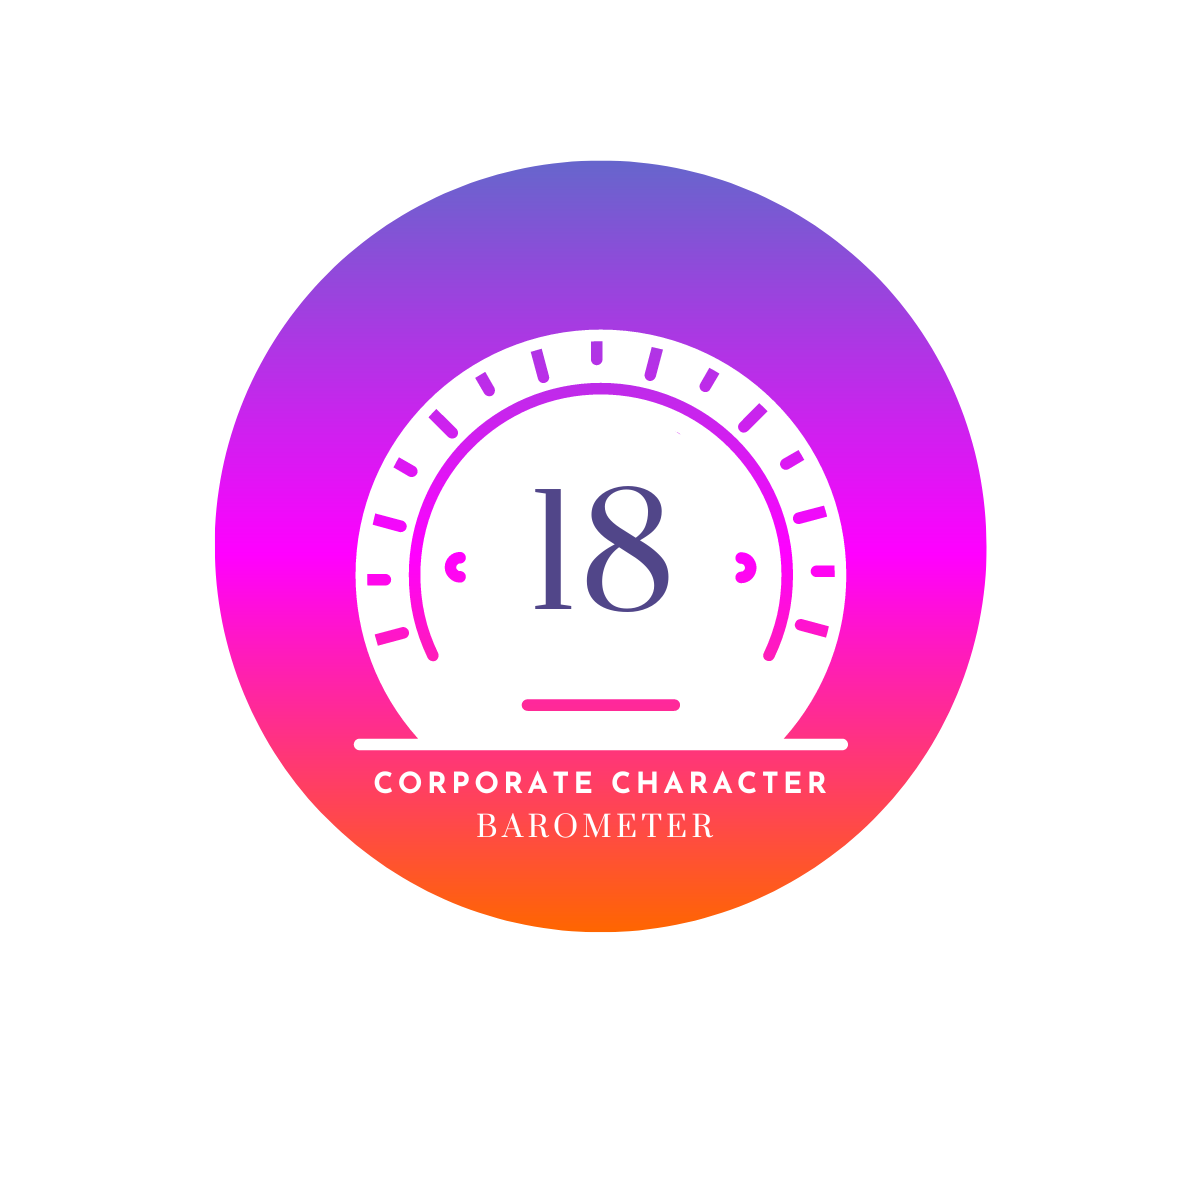 The Peppercomm and Ragan Communications Corporate Character Barometer